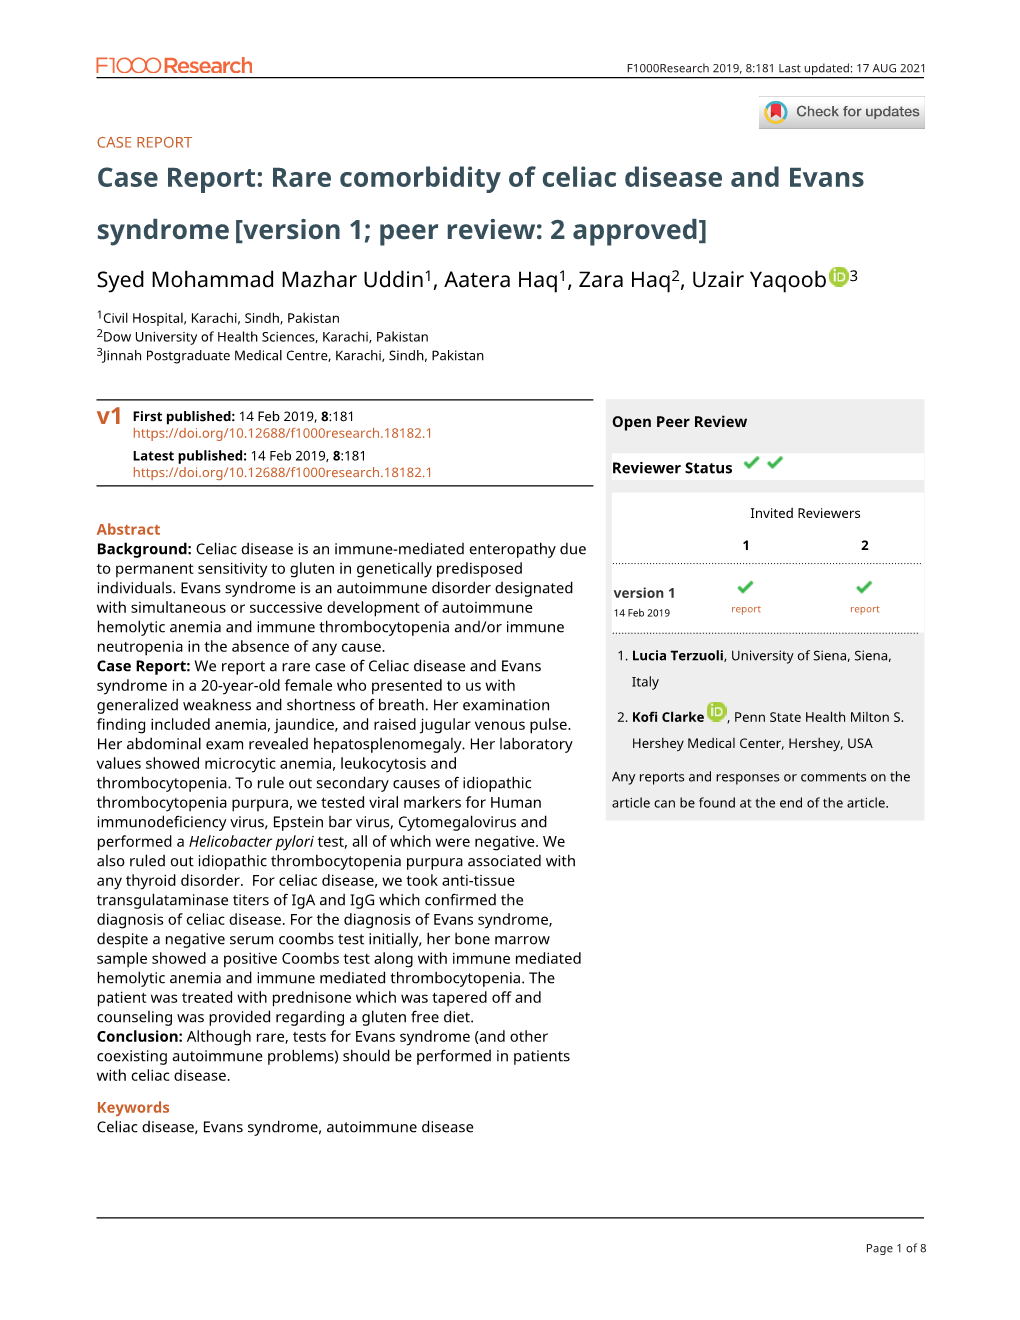 Rare Comorbidity of Celiac Disease and Evans Syndrome [Version 1; Peer Review: 2 Approved]